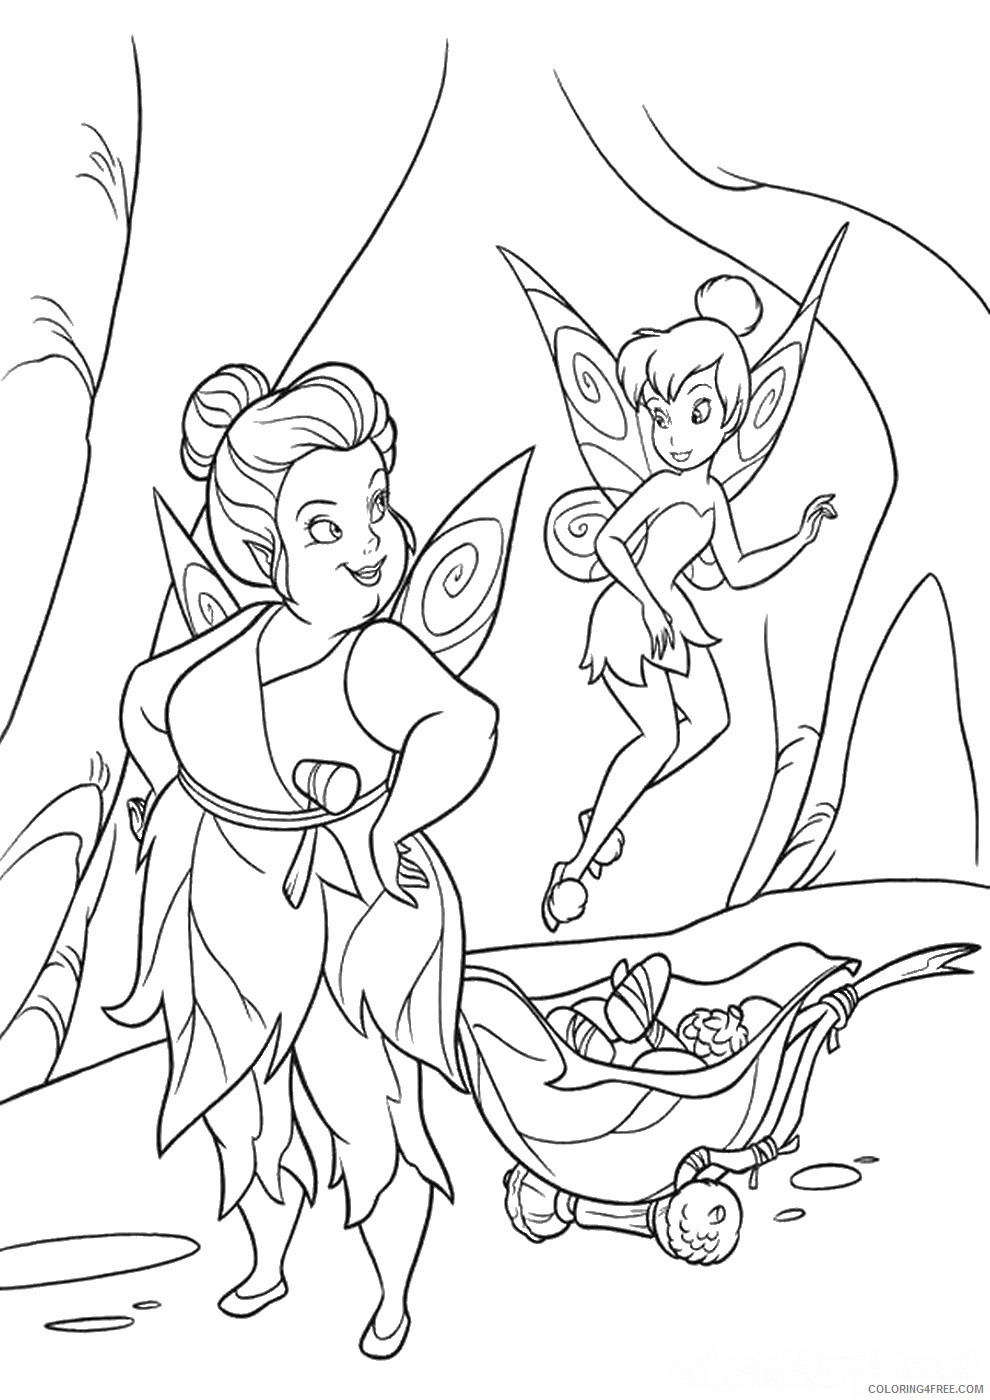 Tinker Bell Coloring Pages Cartoons tinkerbell_cl_11 Printable 2020 6618 Coloring4free